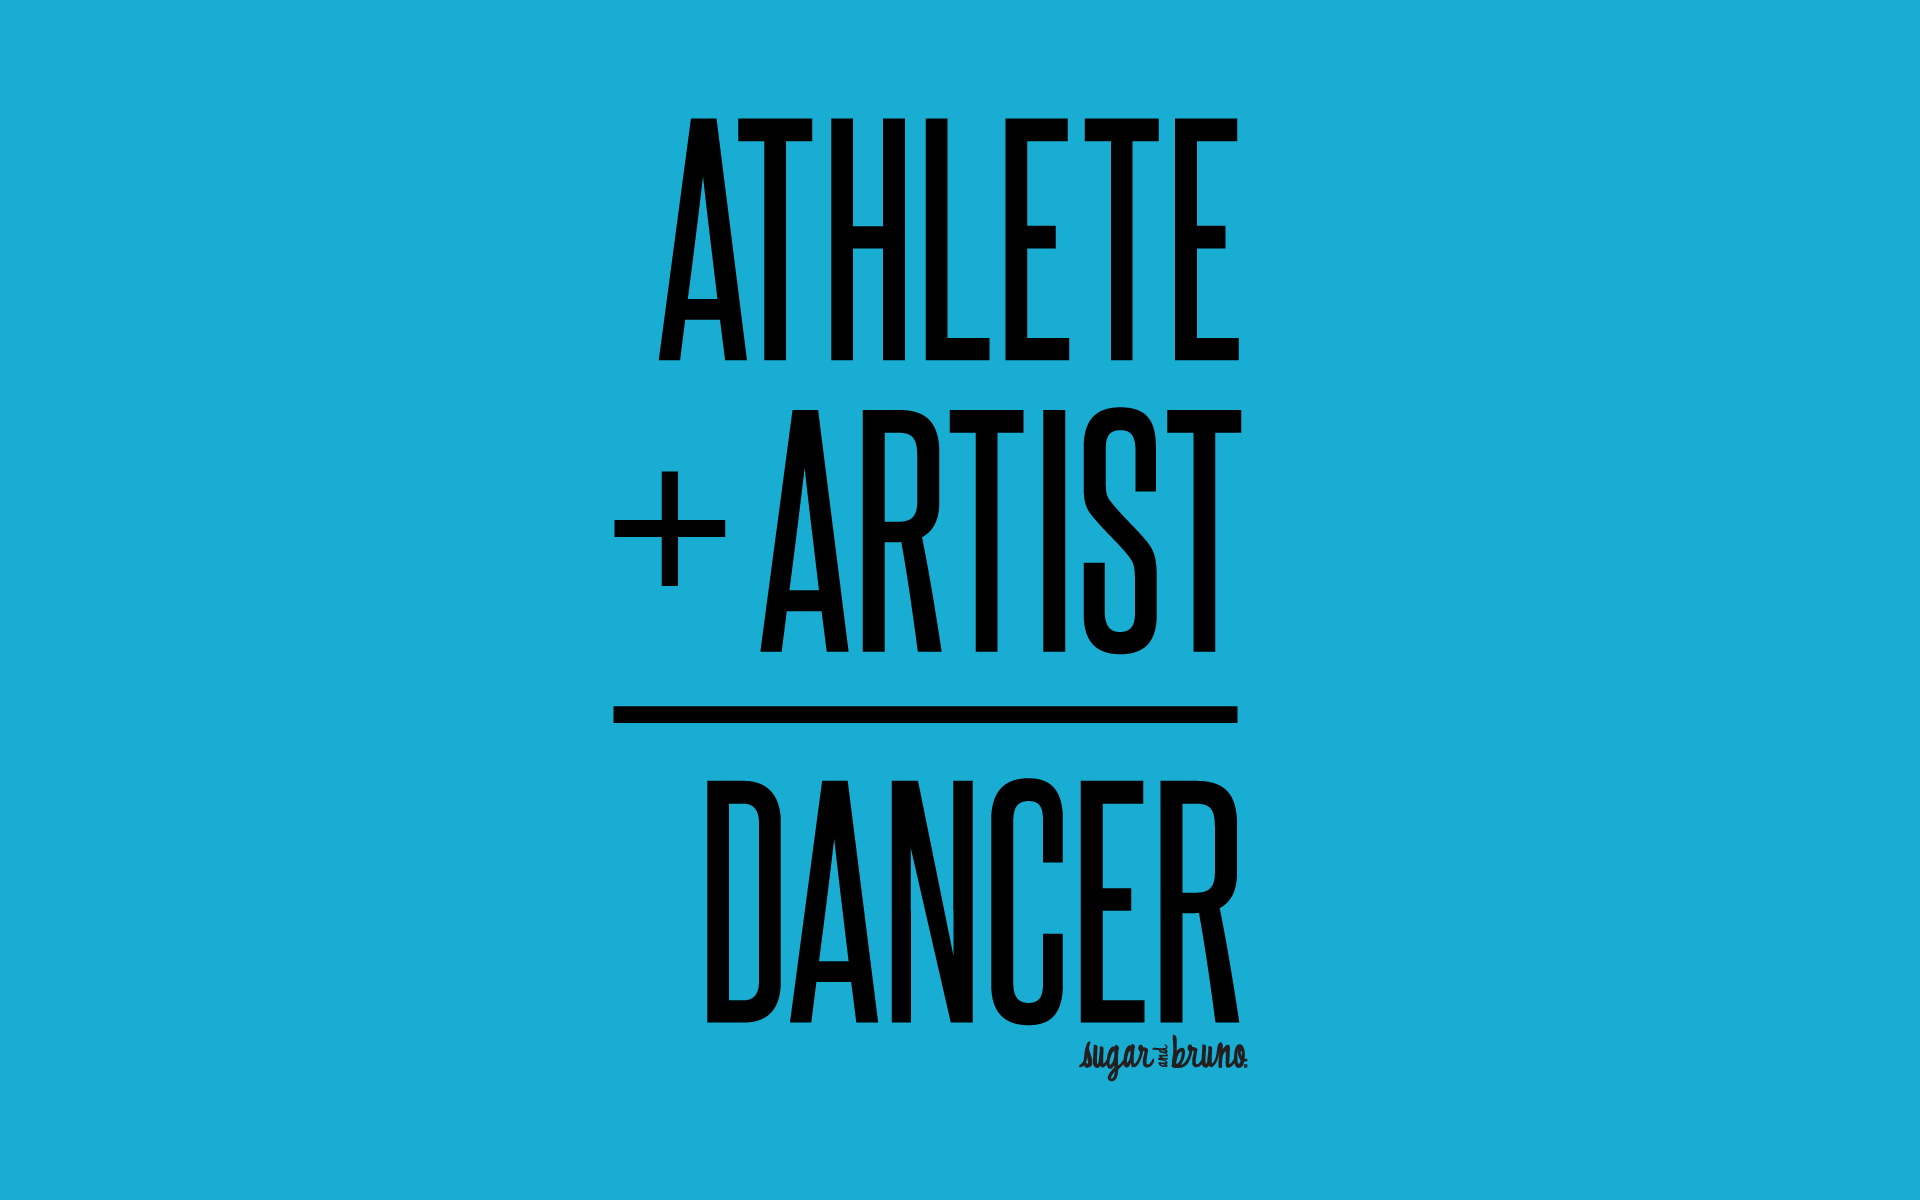 Wallpaper Wednesday Featuring Athlete Artist By Stacey Tookey